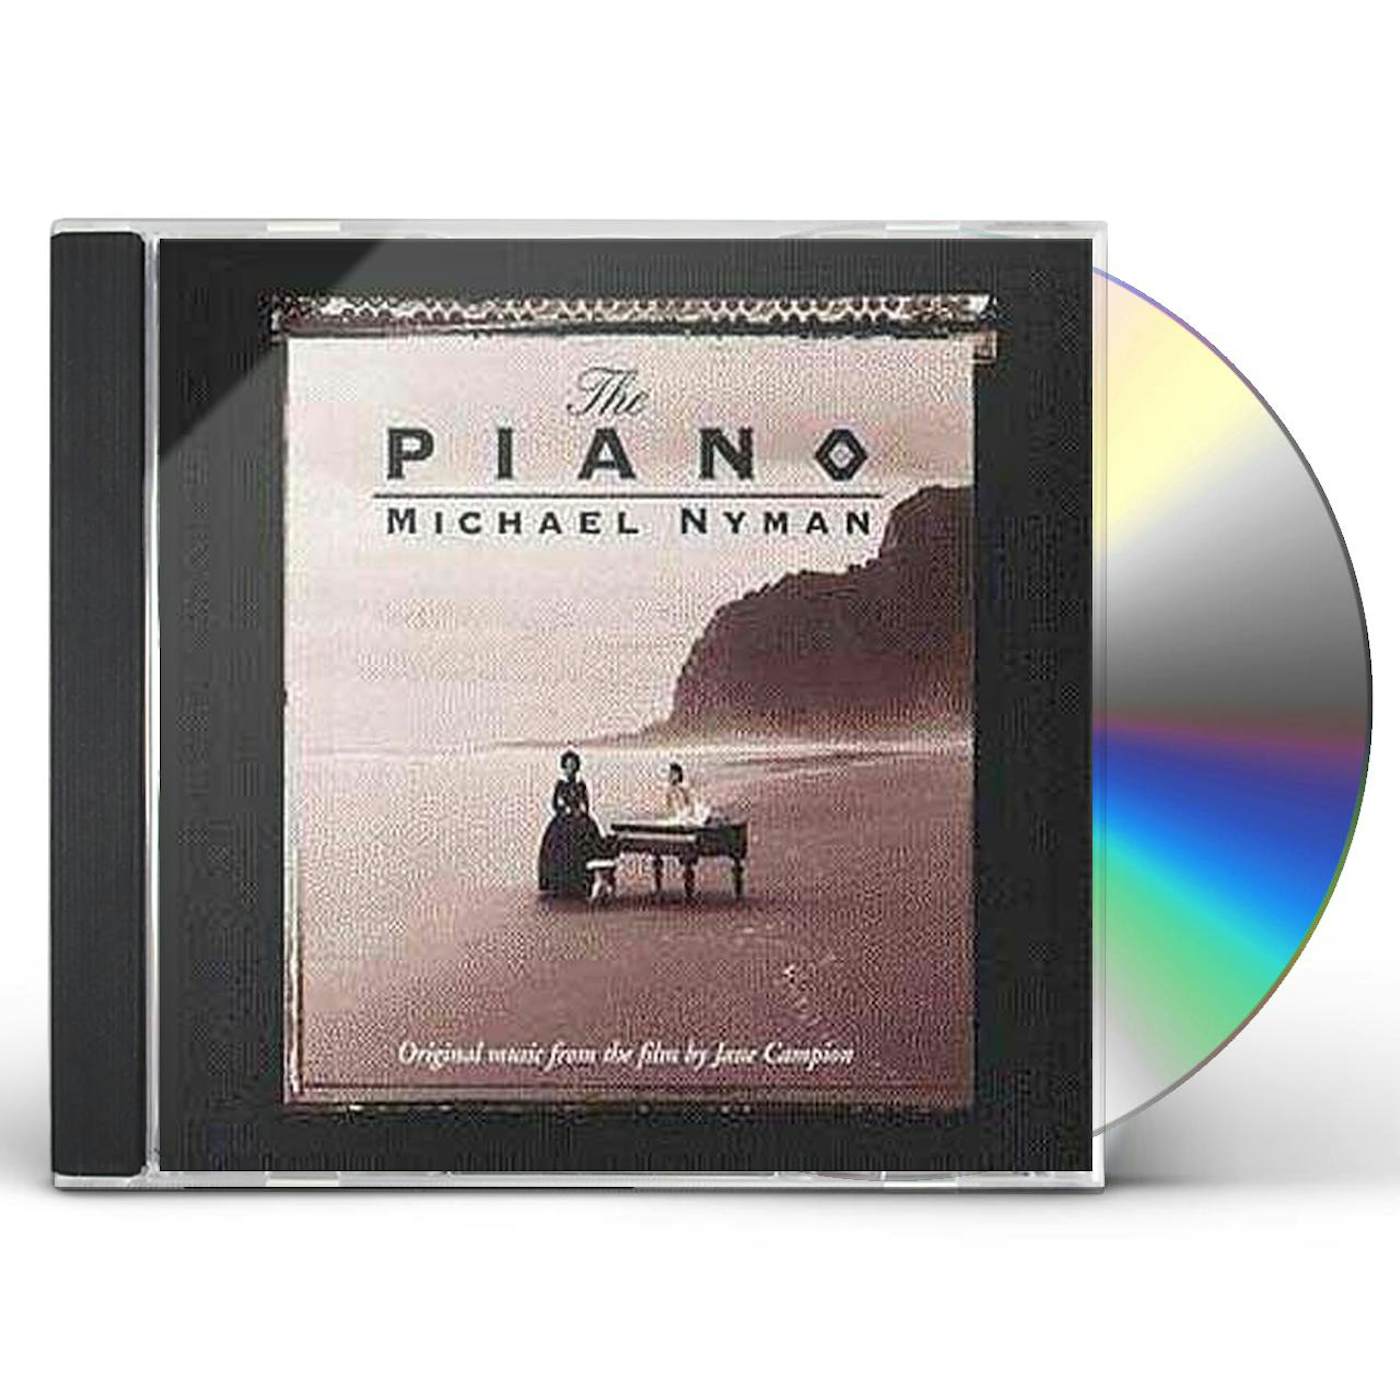 Michael Nyman PIANO: MUSIC FROM THE MOTION PICTURE CD